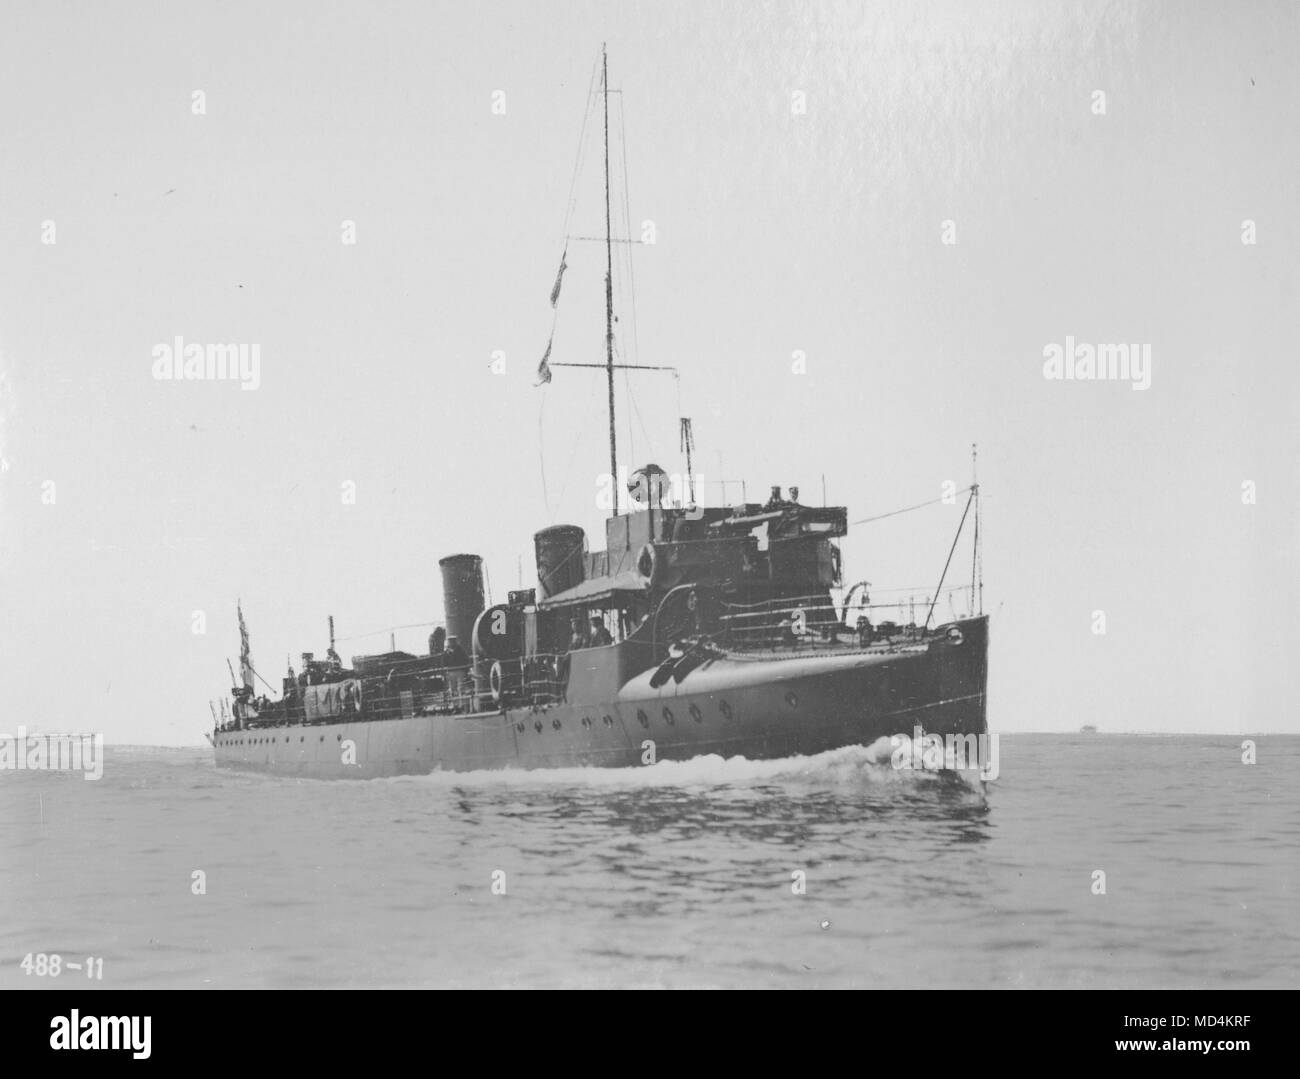 AJAXNETPHOTO. 1906. AT SEA, UK TERRITORIAL WATERS. - HIGH SPEED DESTROYER - HMS GADFLY - FIRST CLASS TORPEDO BOAT NO.6. BUILT BY J. THORNYCROFT IN 1906. LENGTH 170 FEET, DISPLACEMENT 215 TONS. SPEED 27.25 KNOTS. PHOTO:VT COLLECTION/AJAXNETPHOTO REF:AVL/HMS GADFLY VT488 11 Stock Photo